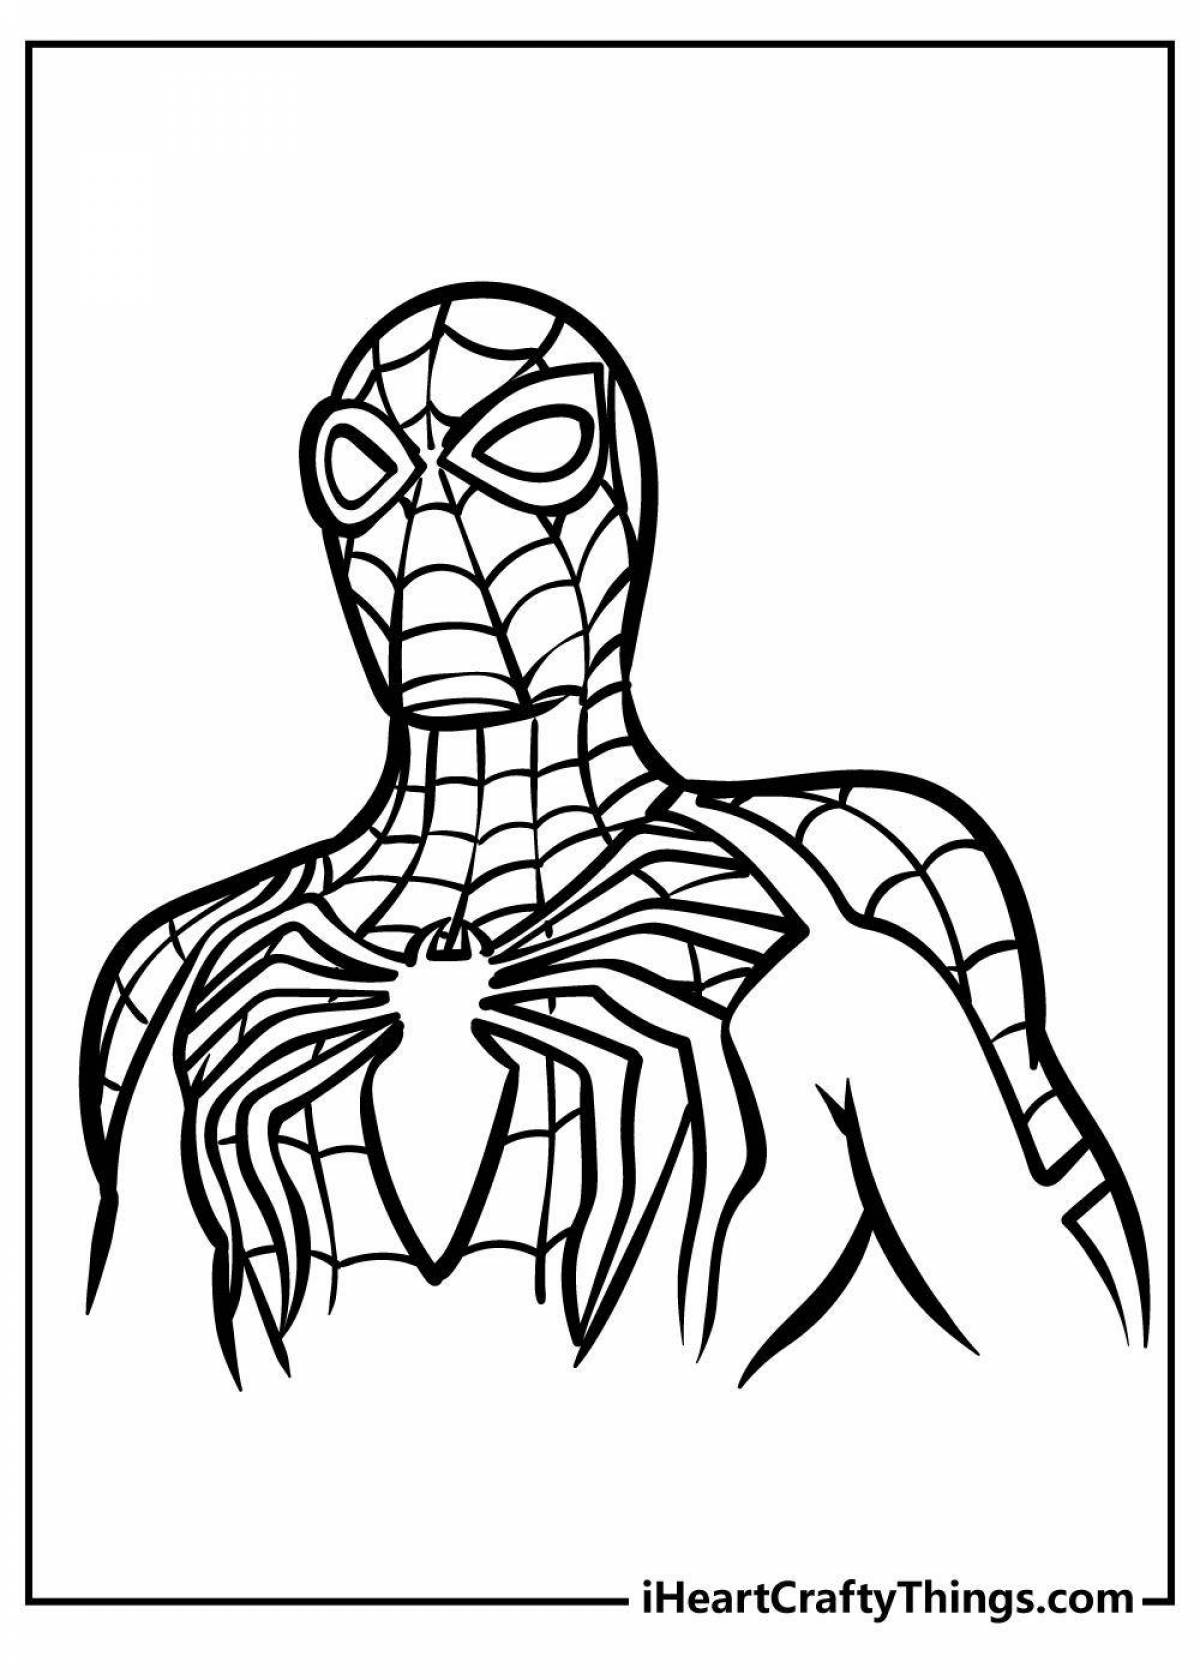 Funny spiderman face coloring page